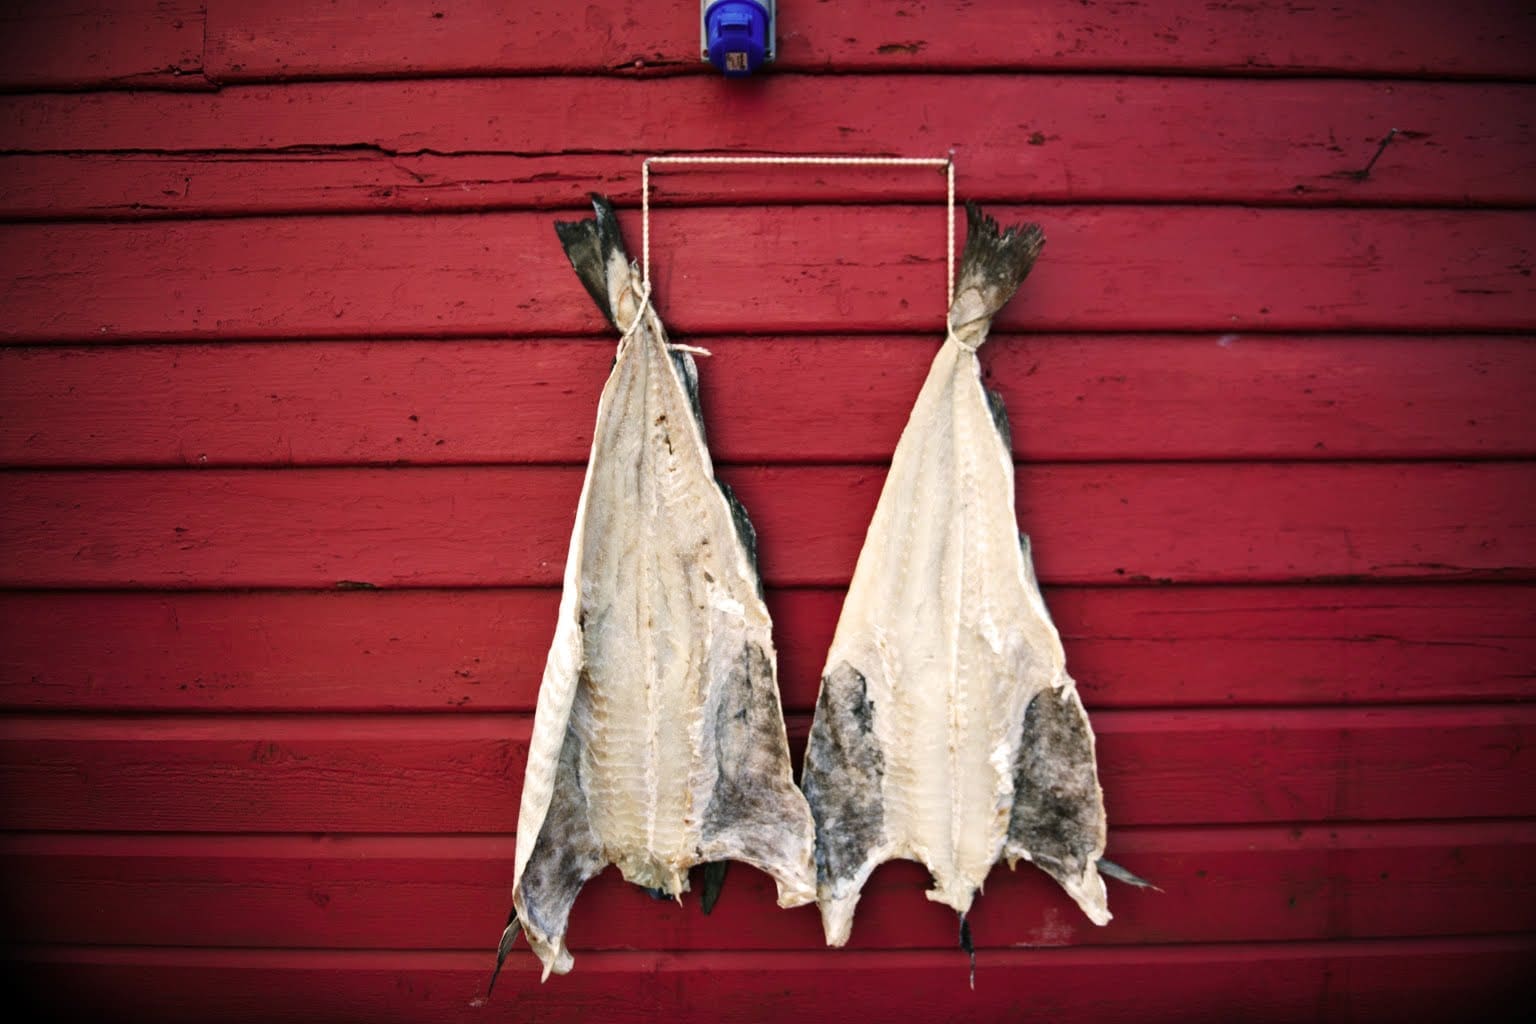 Fjord Norway: Home of the World’s Best Seafood